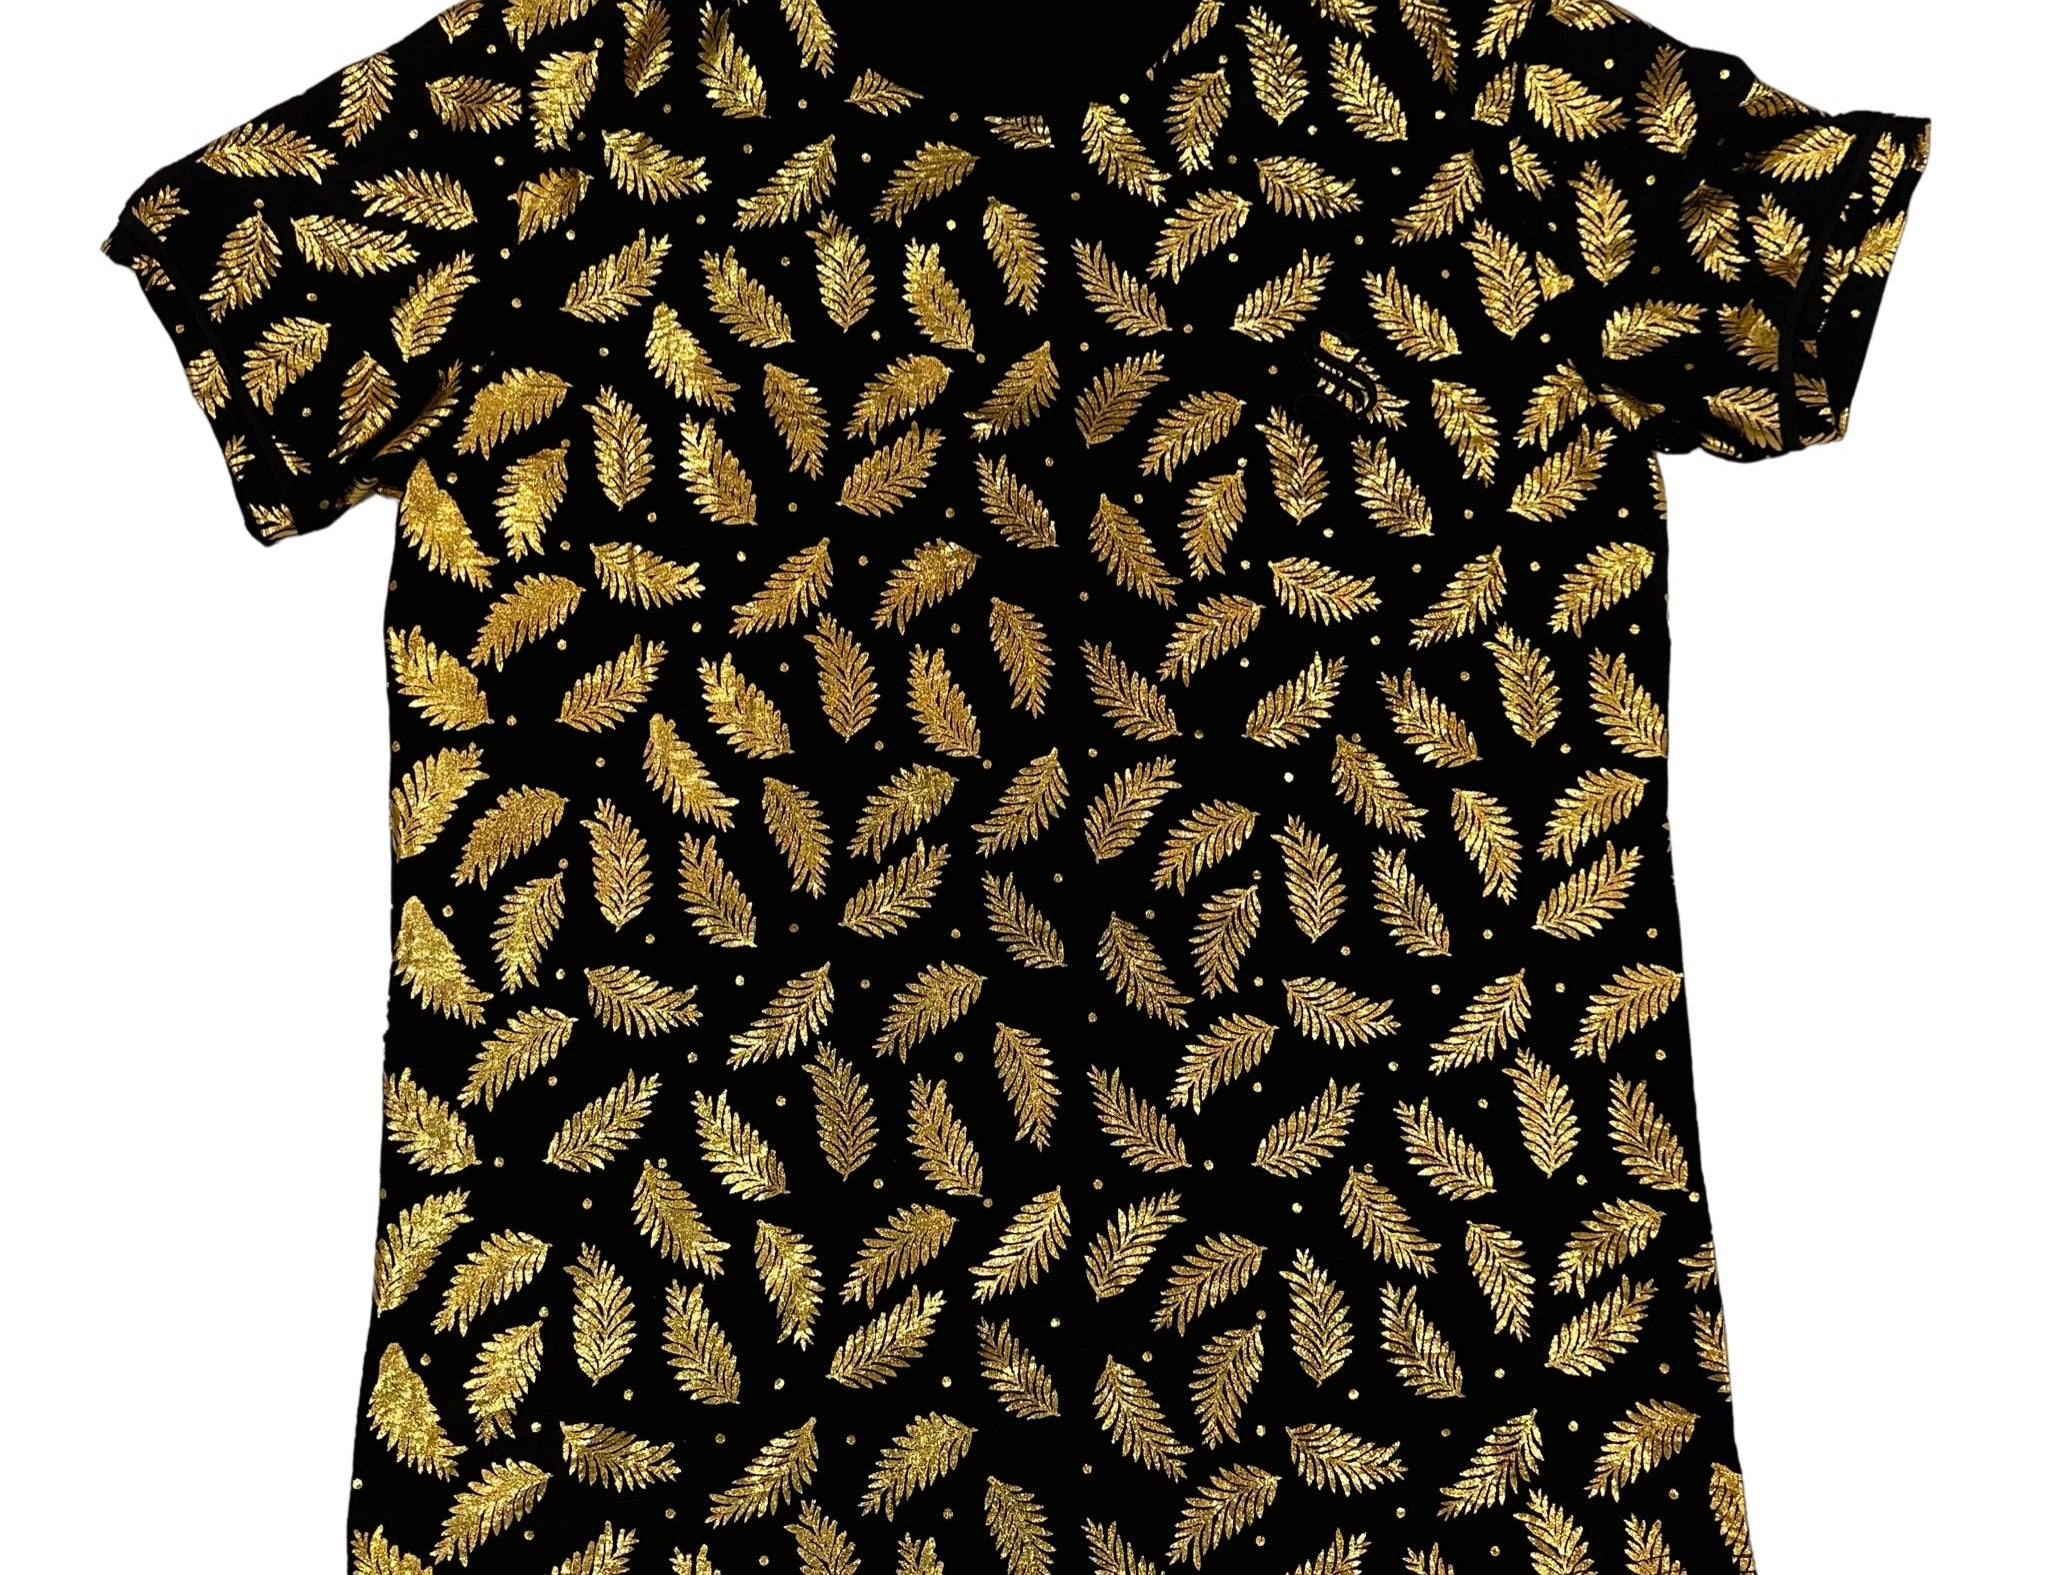 Golden Leaves Boy - Black Short Sleeves T-Shirt for Men (PRE-ORDER DISPATCH DATE 25 DECEMBER 2023) - Sarman Fashion - Wholesale Clothing Fashion Brand for Men from Canada